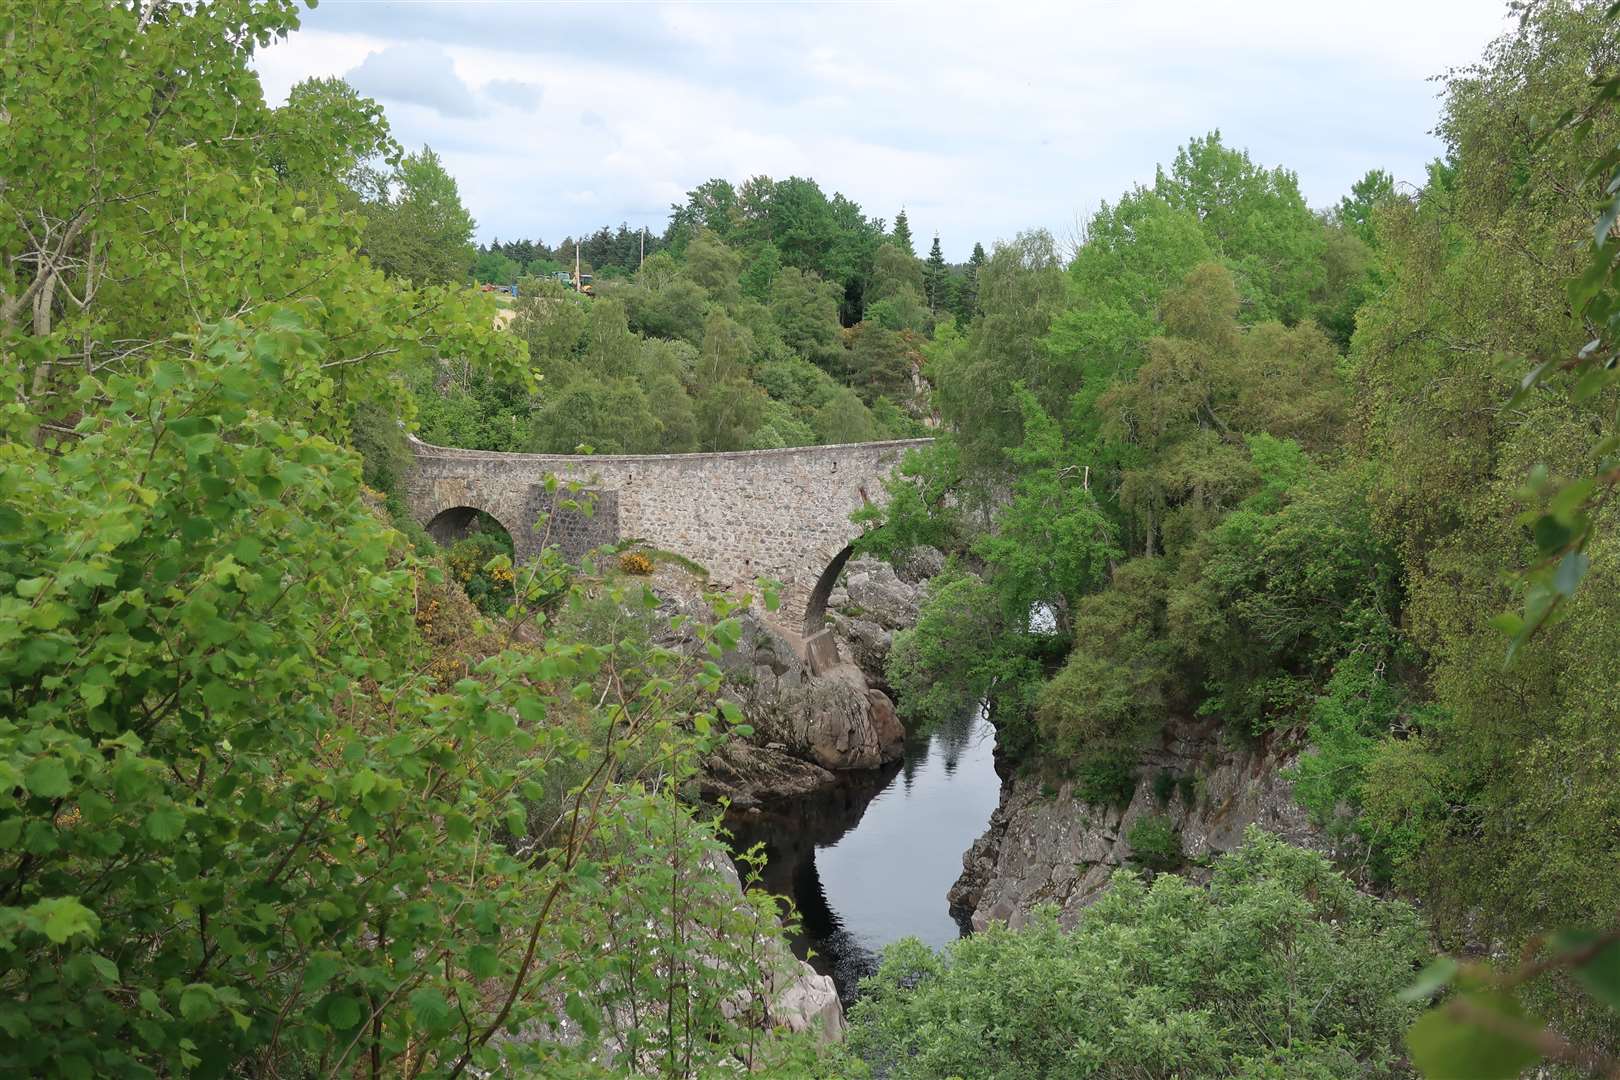 Dulsie Bridge from the viewpoint.